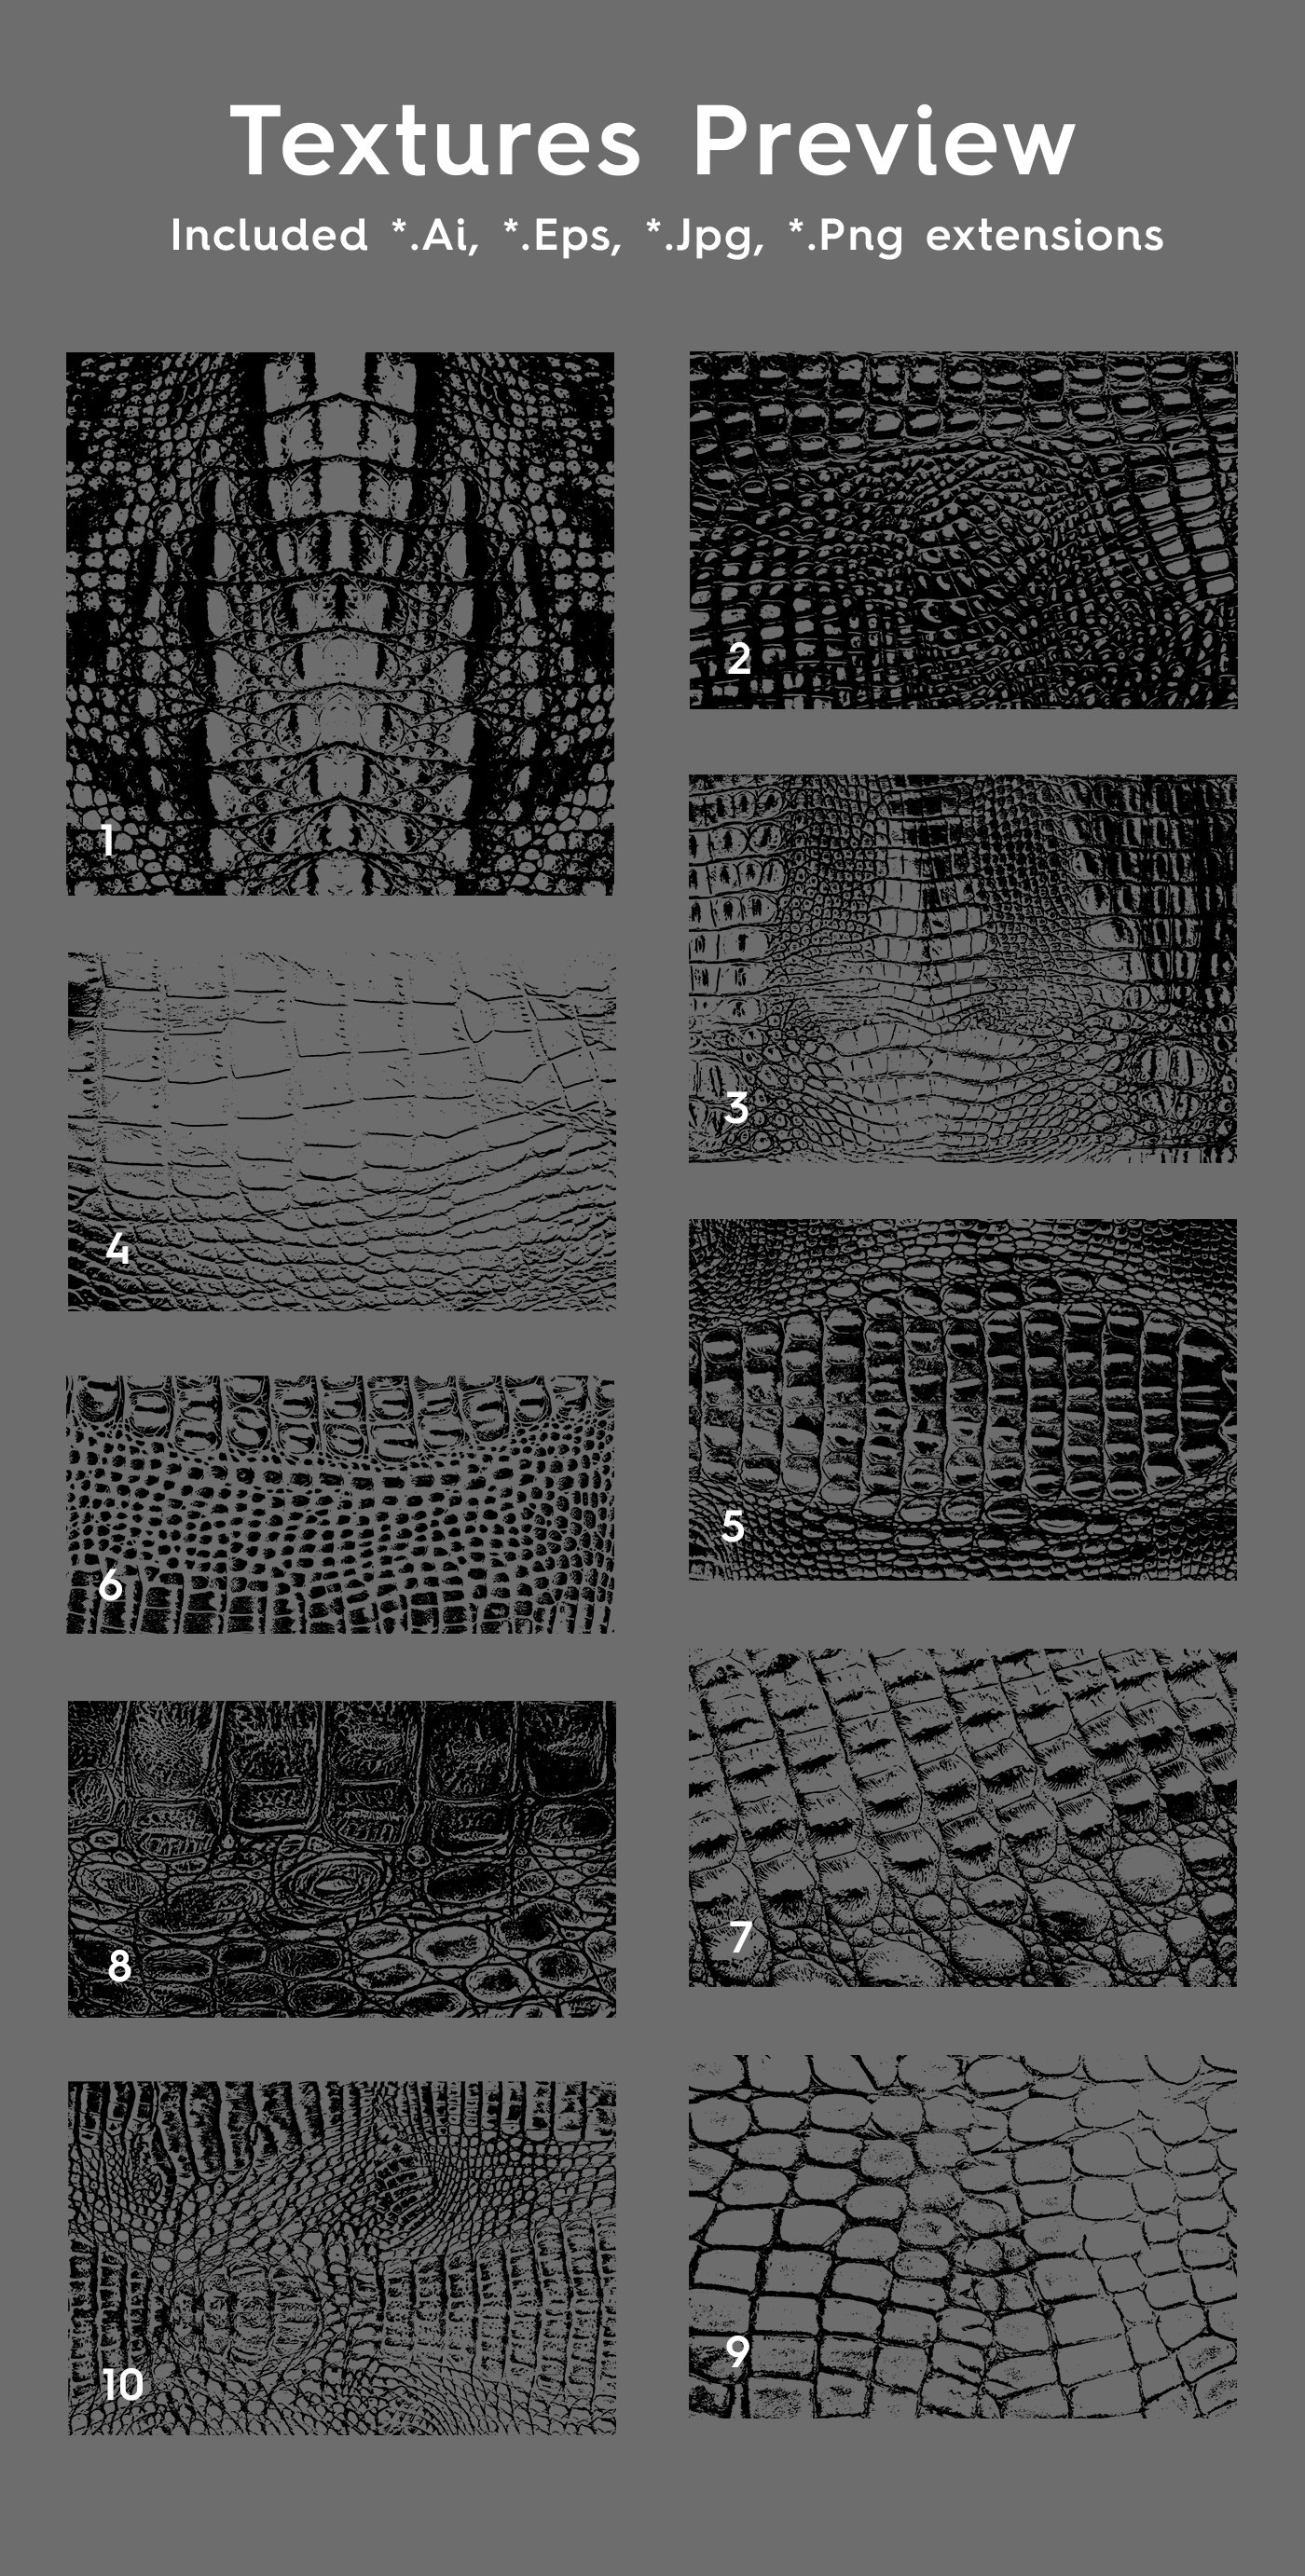 crocodile leather texture overlay textures preview 748